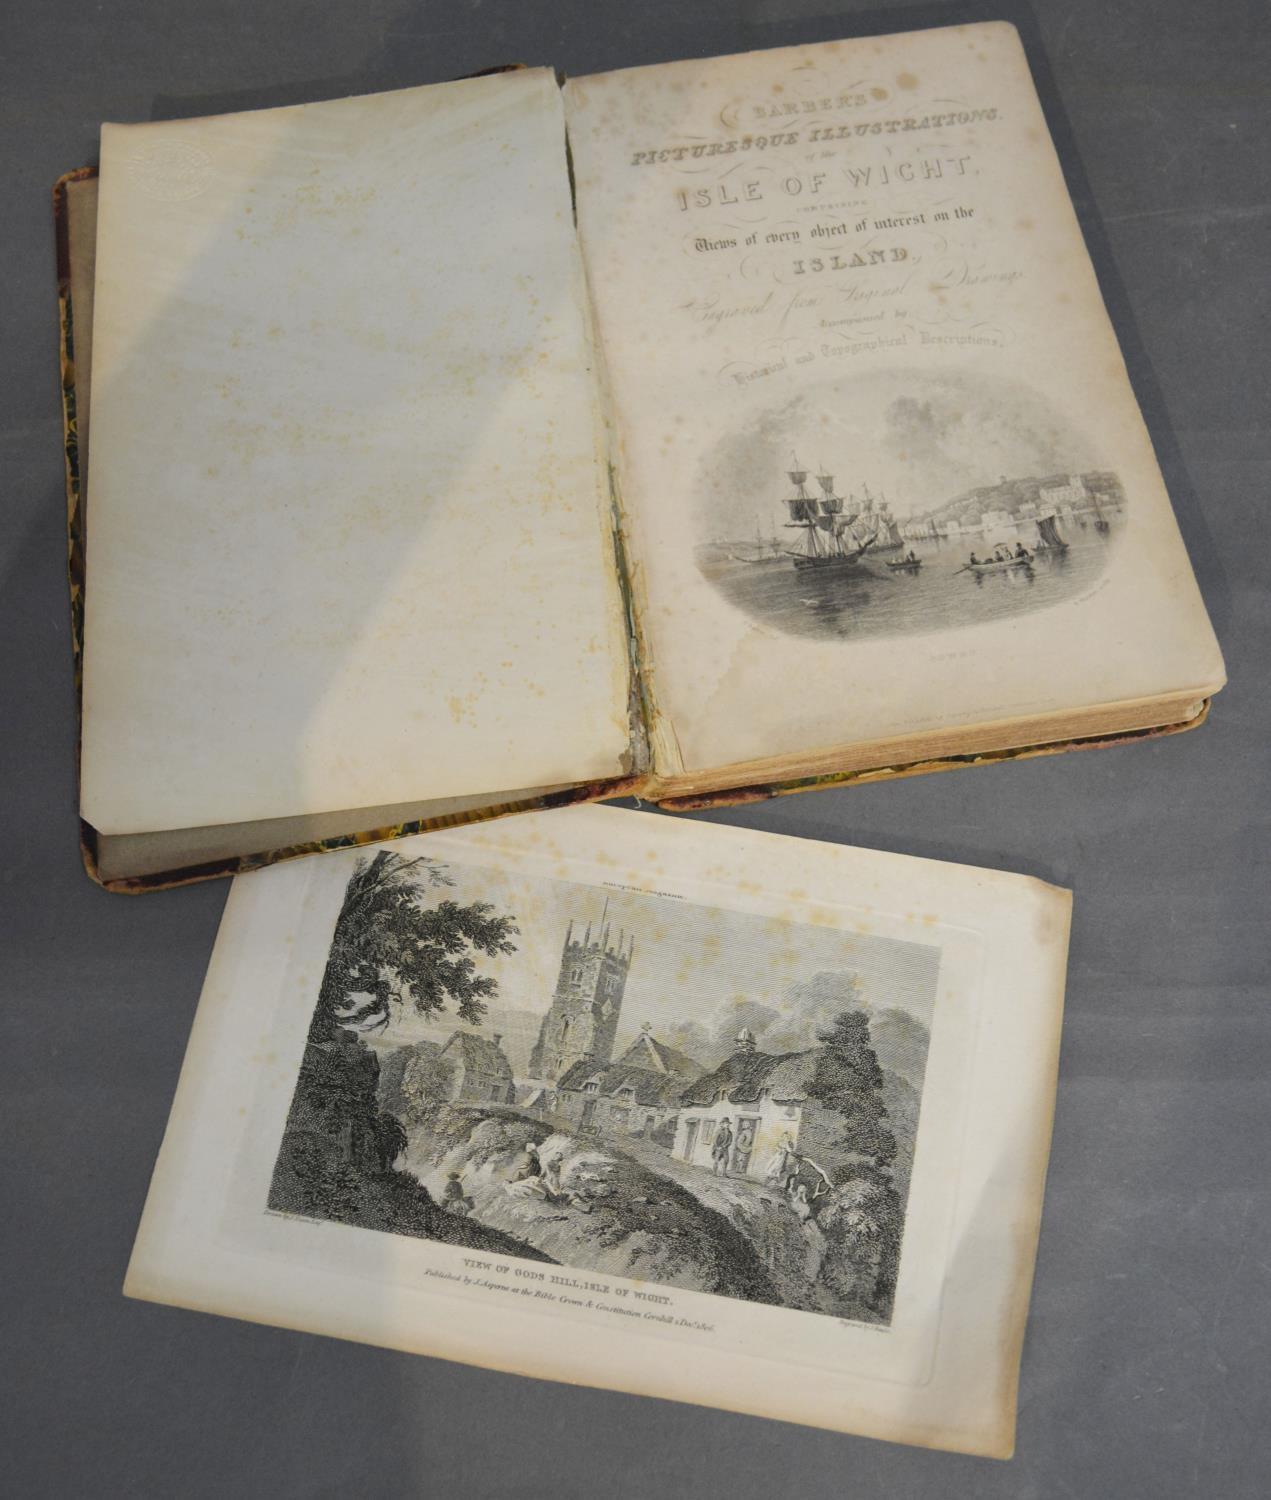 One Volume 'Barbers Picturesque Illustrations of the Isle of Wight'